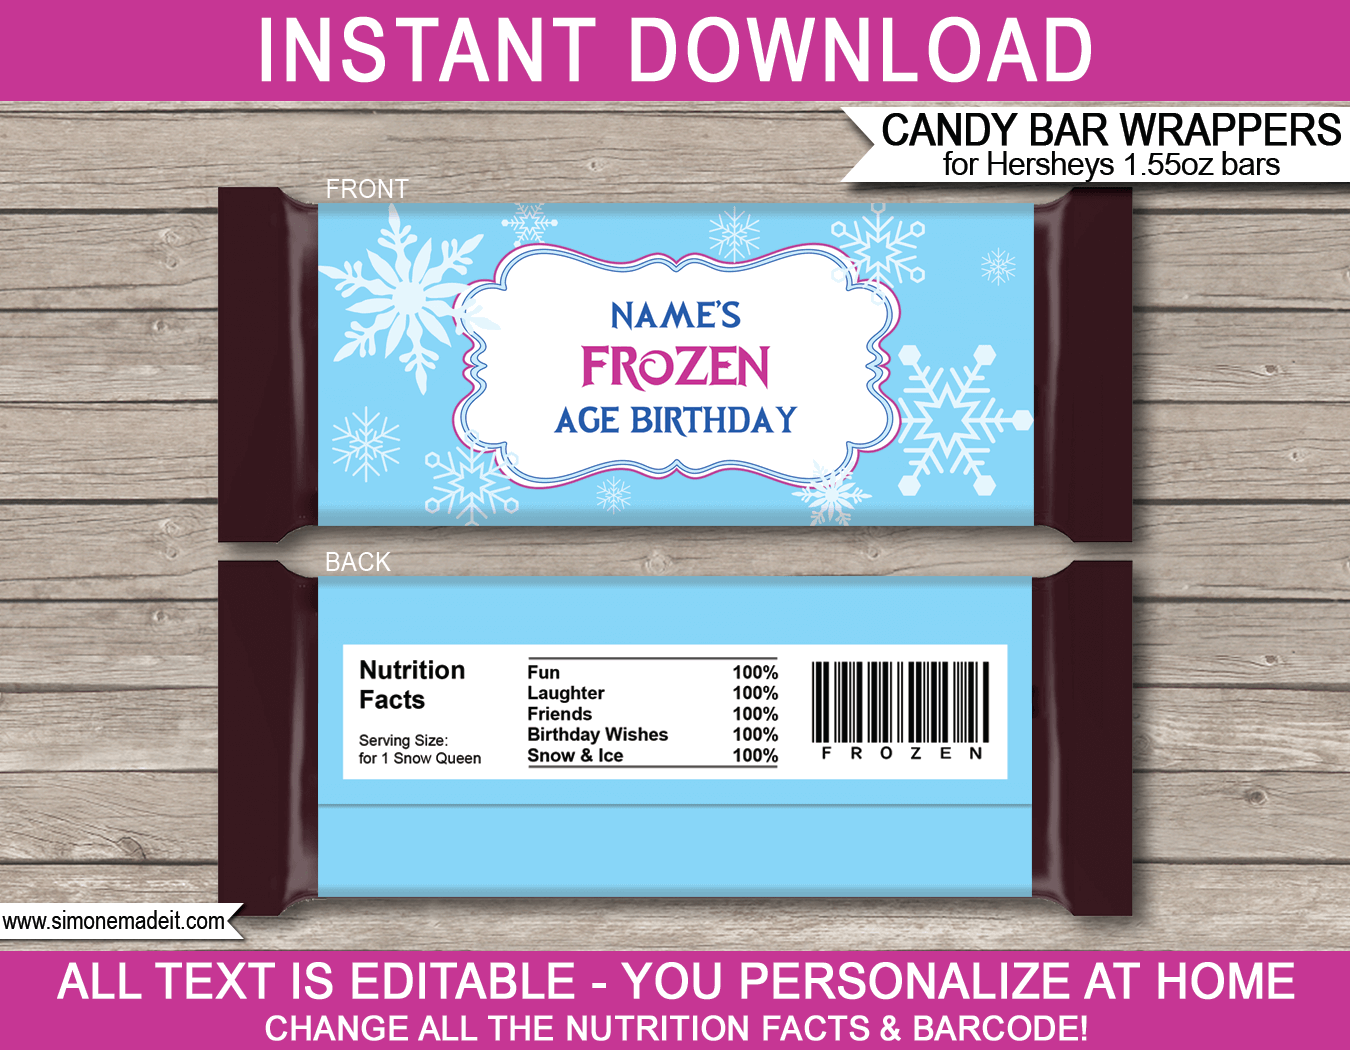 Frozen Hershey Candy Bar Wrappers | Princess Birthday Party Favors | Personalized Candy Bars | Editable Template | INSTANT DOWNLOAD $3.00 via simonemadeit.com